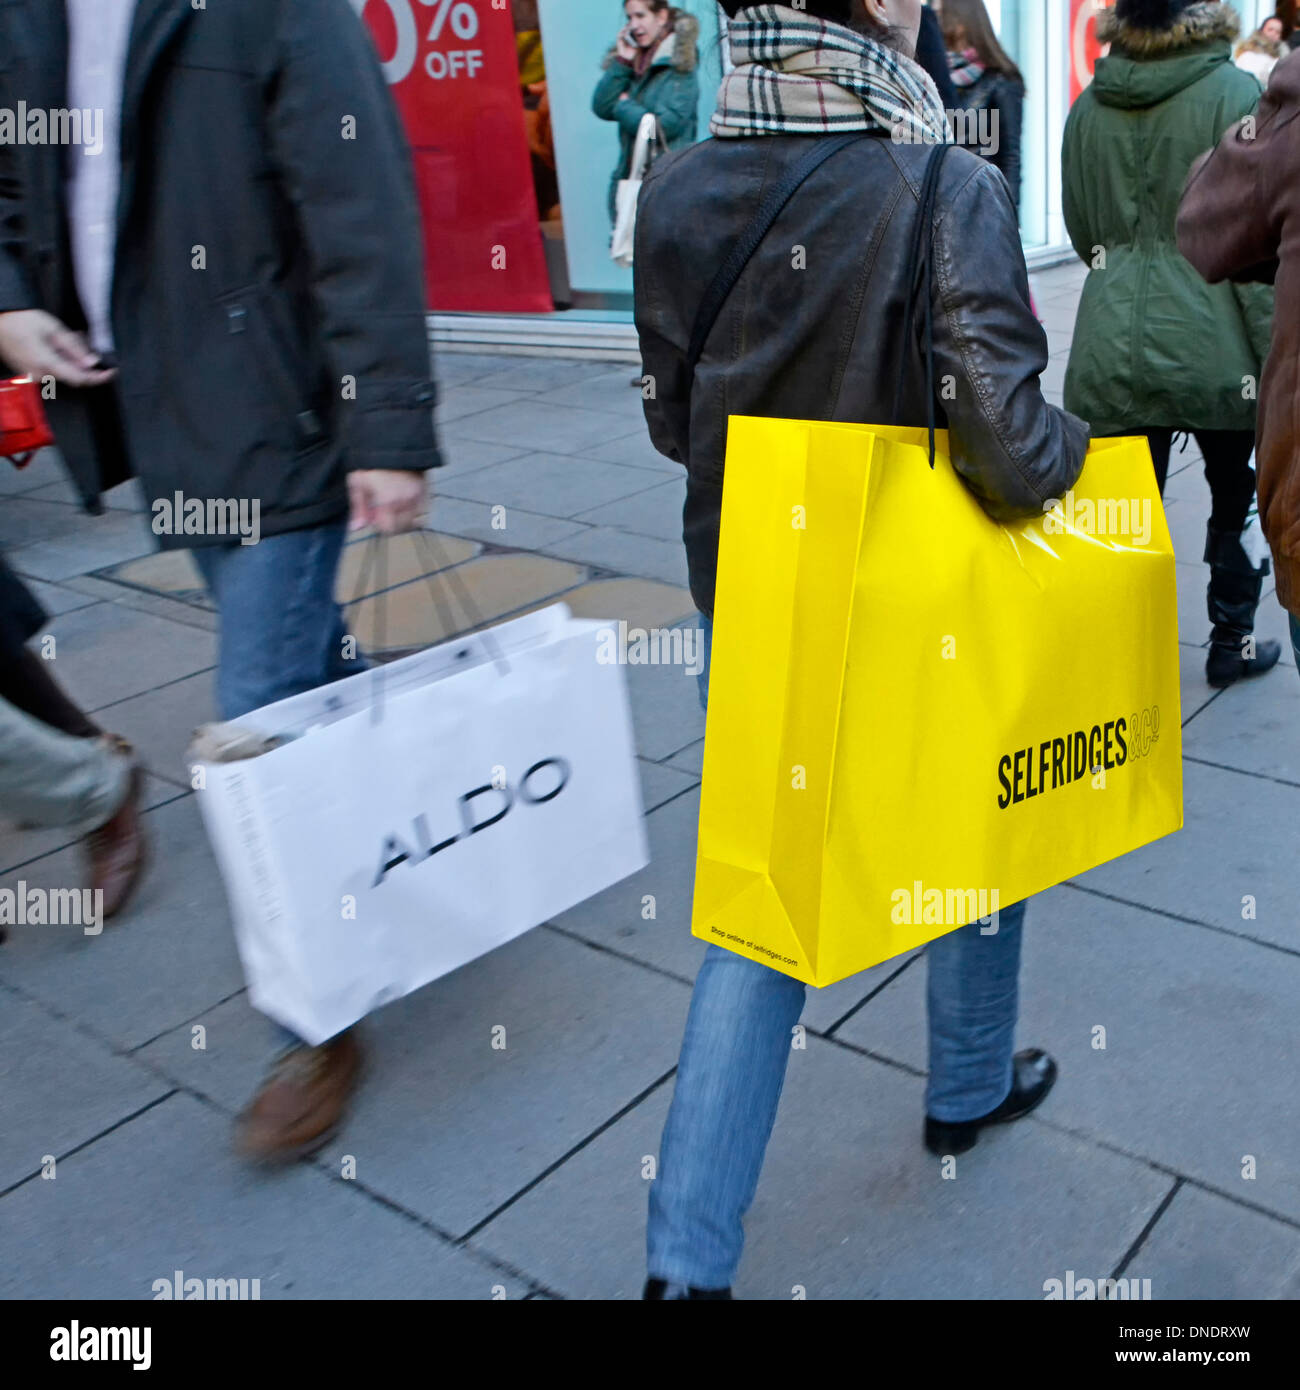 Shoppers with carrier bags from Selfridges and Aldo stores in Oxford Street Stock Photo